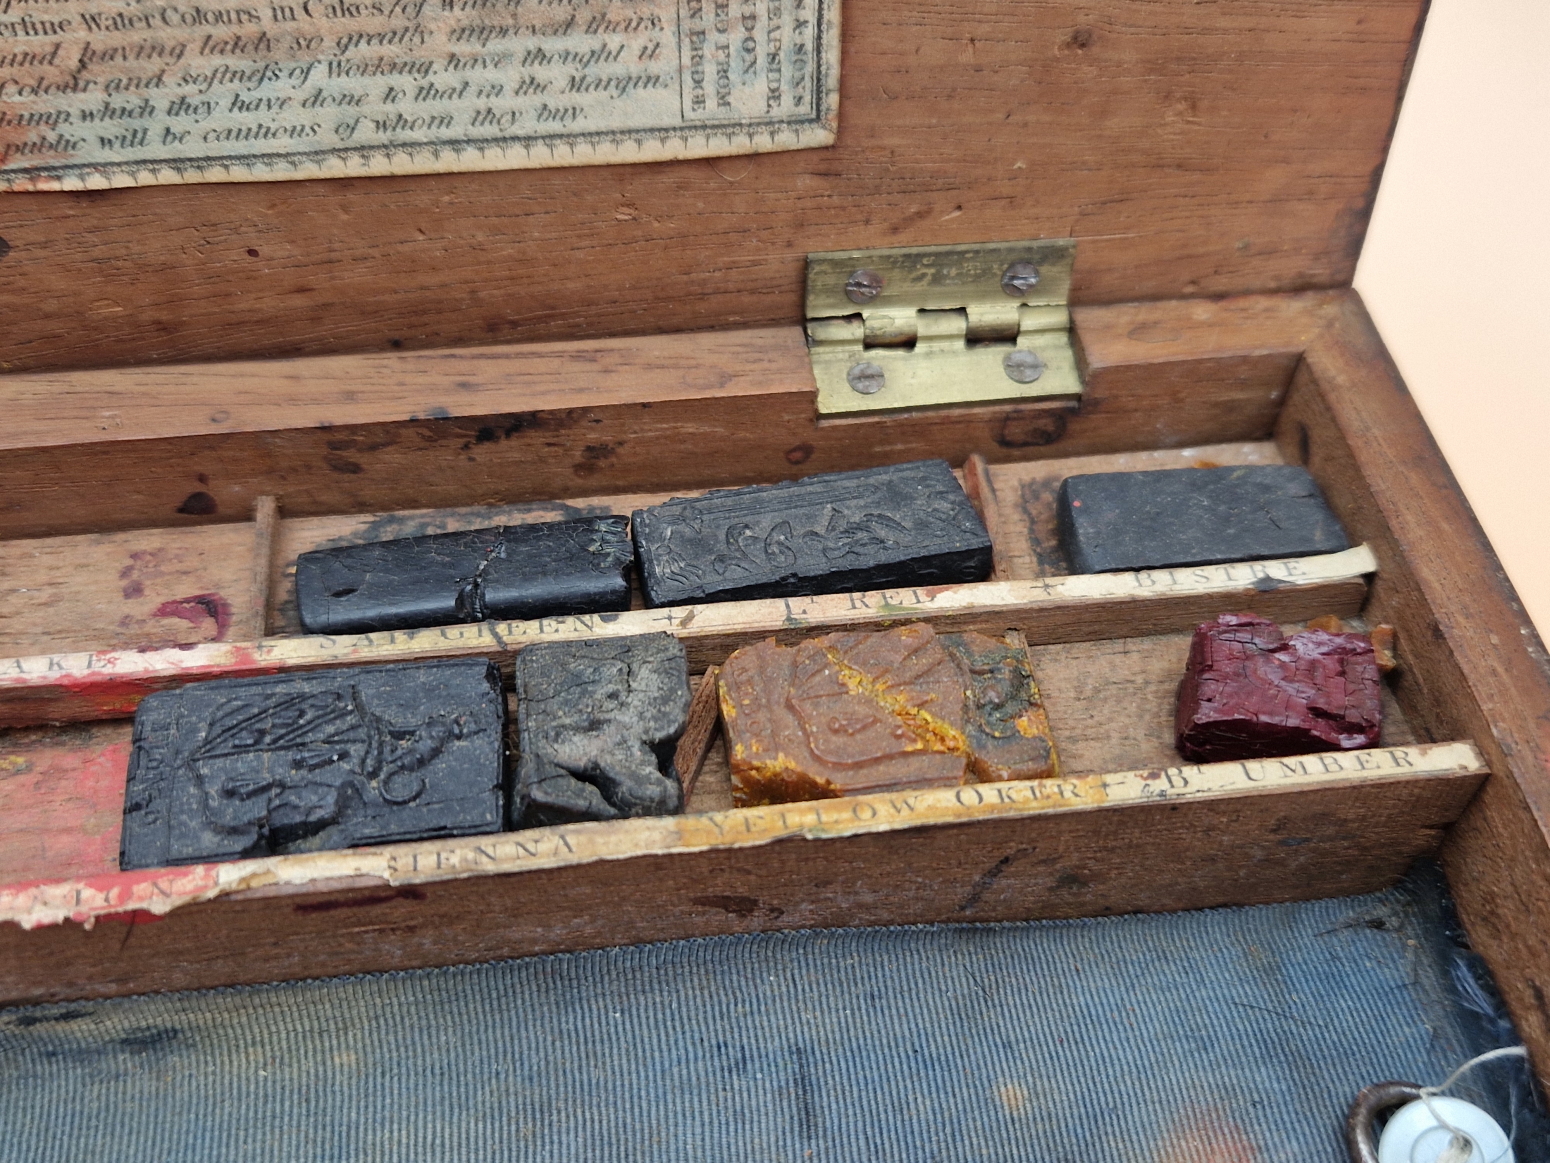 A LATE 19th C. REEVES MAHOGANY PAINT BOX CONTAINING SOME BLOCKS OF UNUSED PAINT AND CERAMIC PALETTES - Image 7 of 9